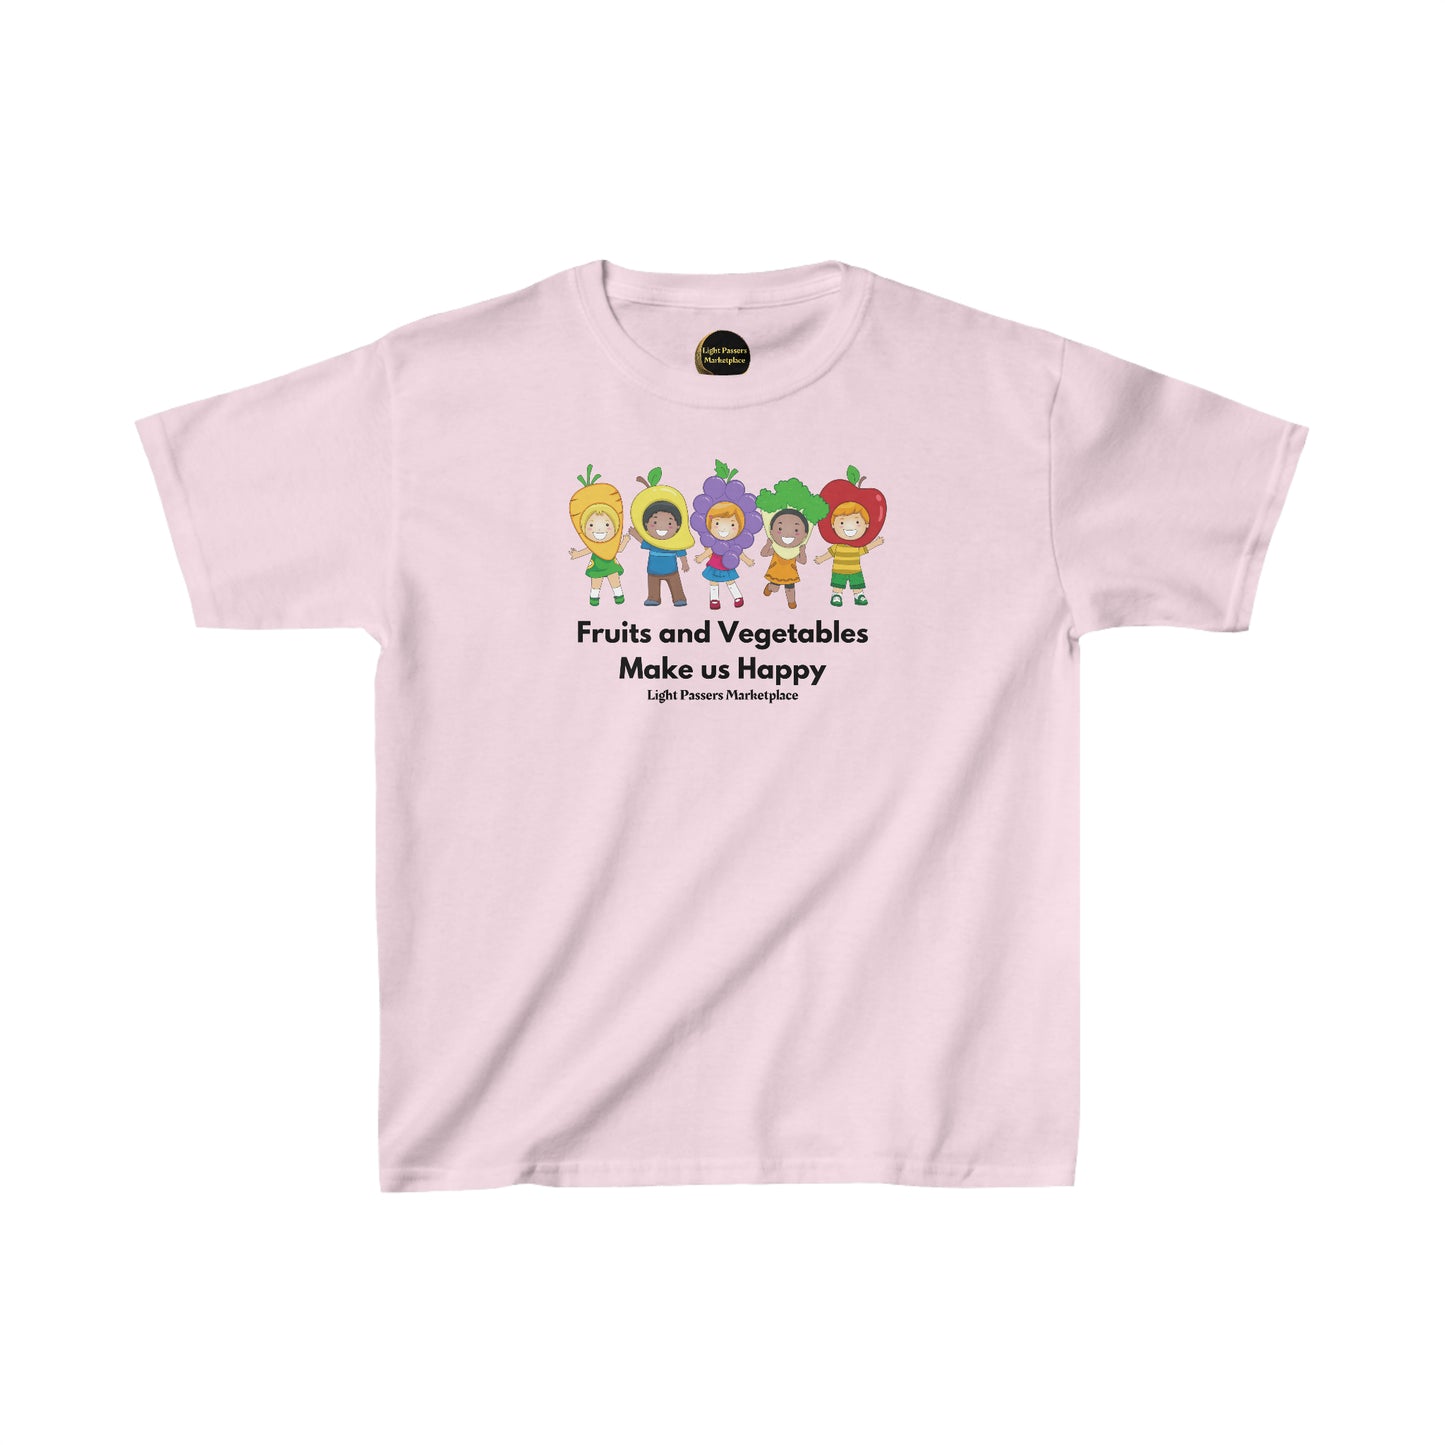 Light Passers Marketplace Fruits and Vegetables Make Us Happy Youth Cotton T-shirt Nutrition, Diversity, Mental Health